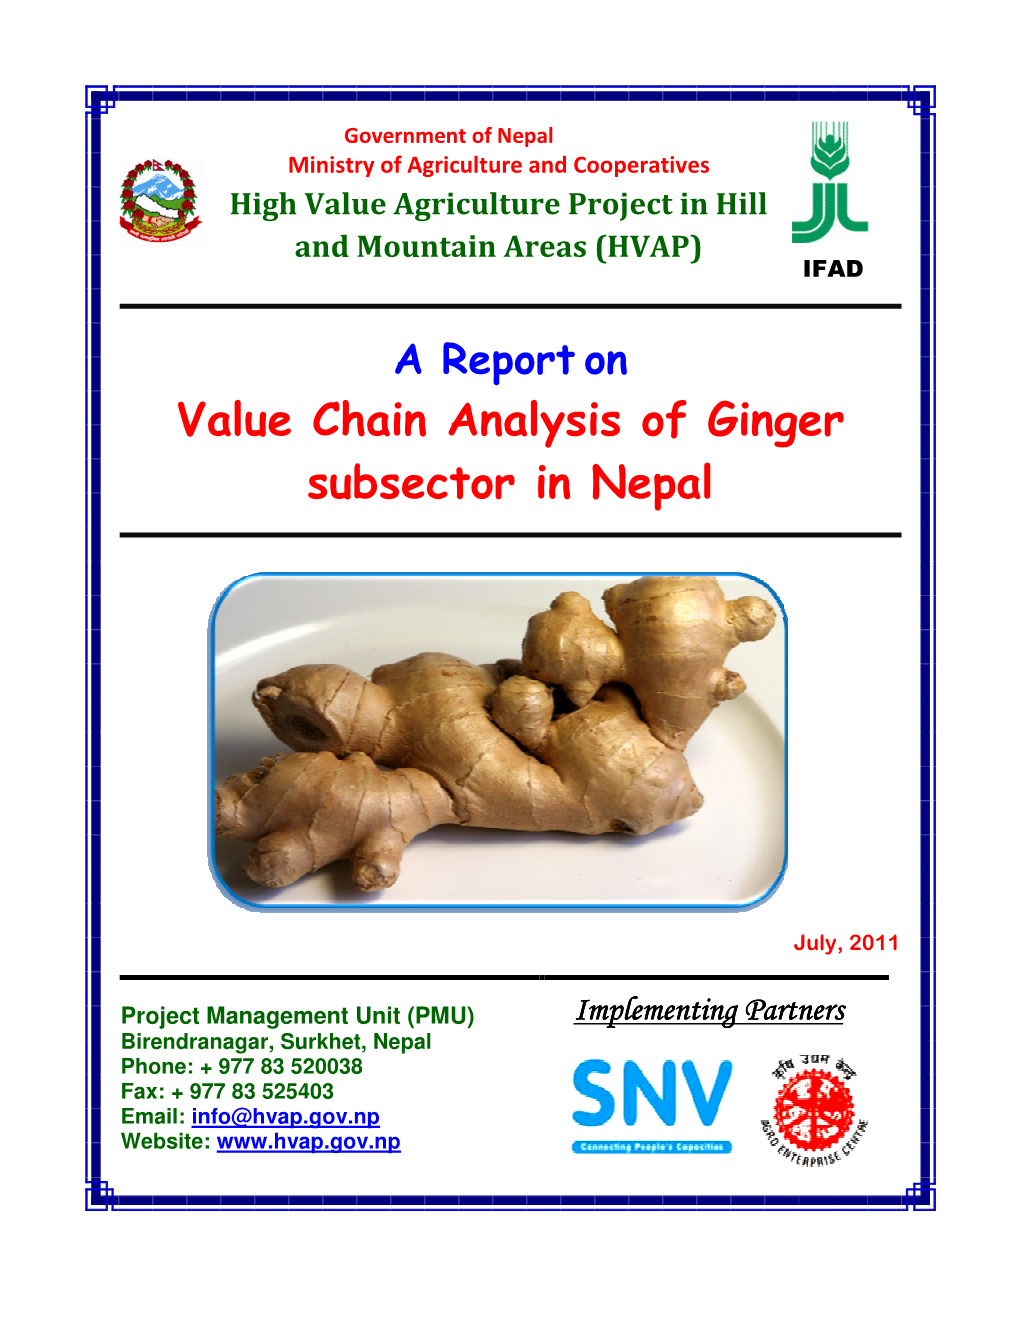 Value Chain Analysis of Ginger Subsector in Nepal